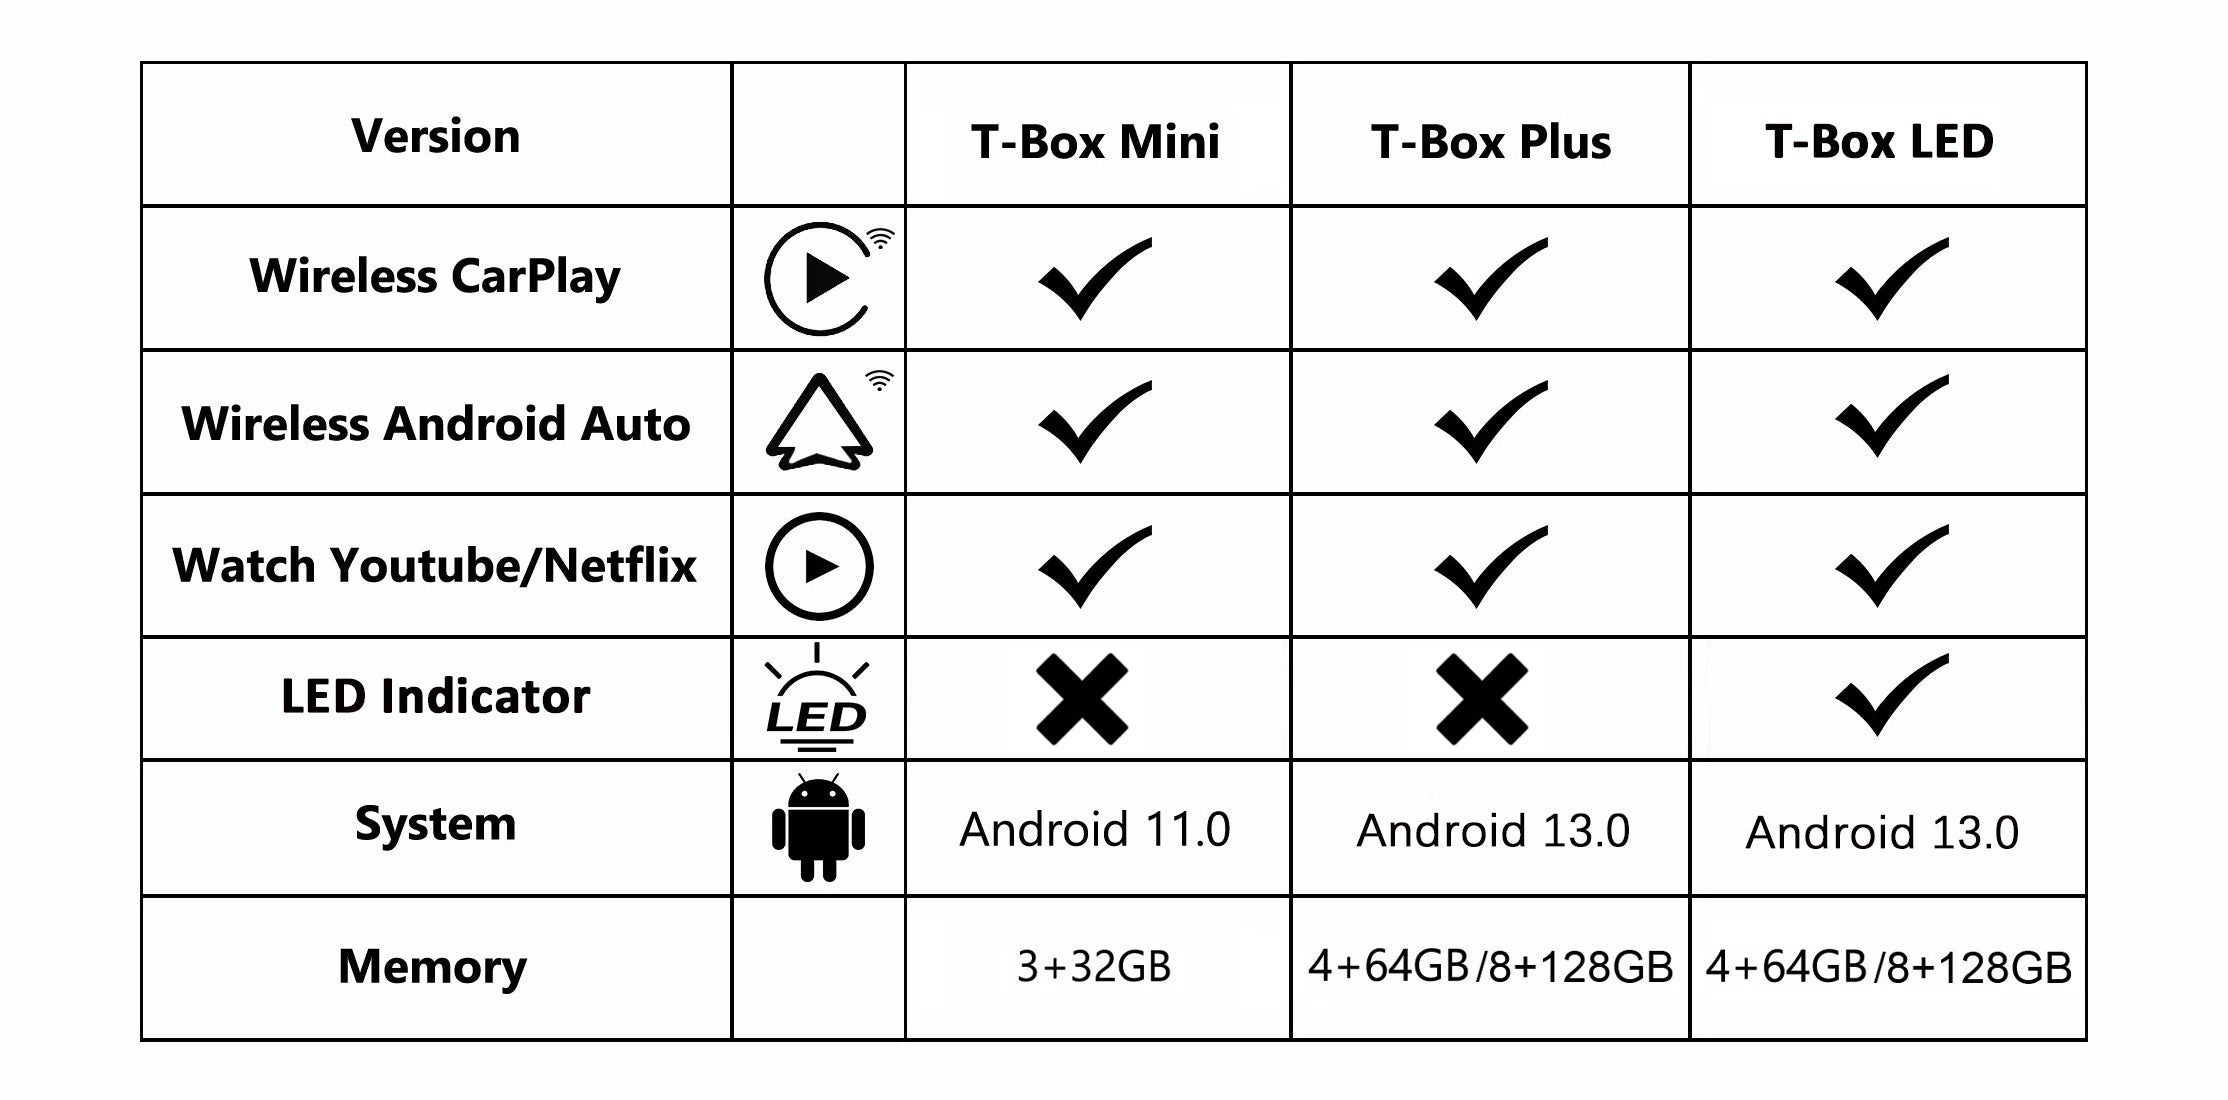 Comparison of features between Carlinkit Tbox Plus, Carlinkit Tbox Led, and Carlinkit Tbox mini